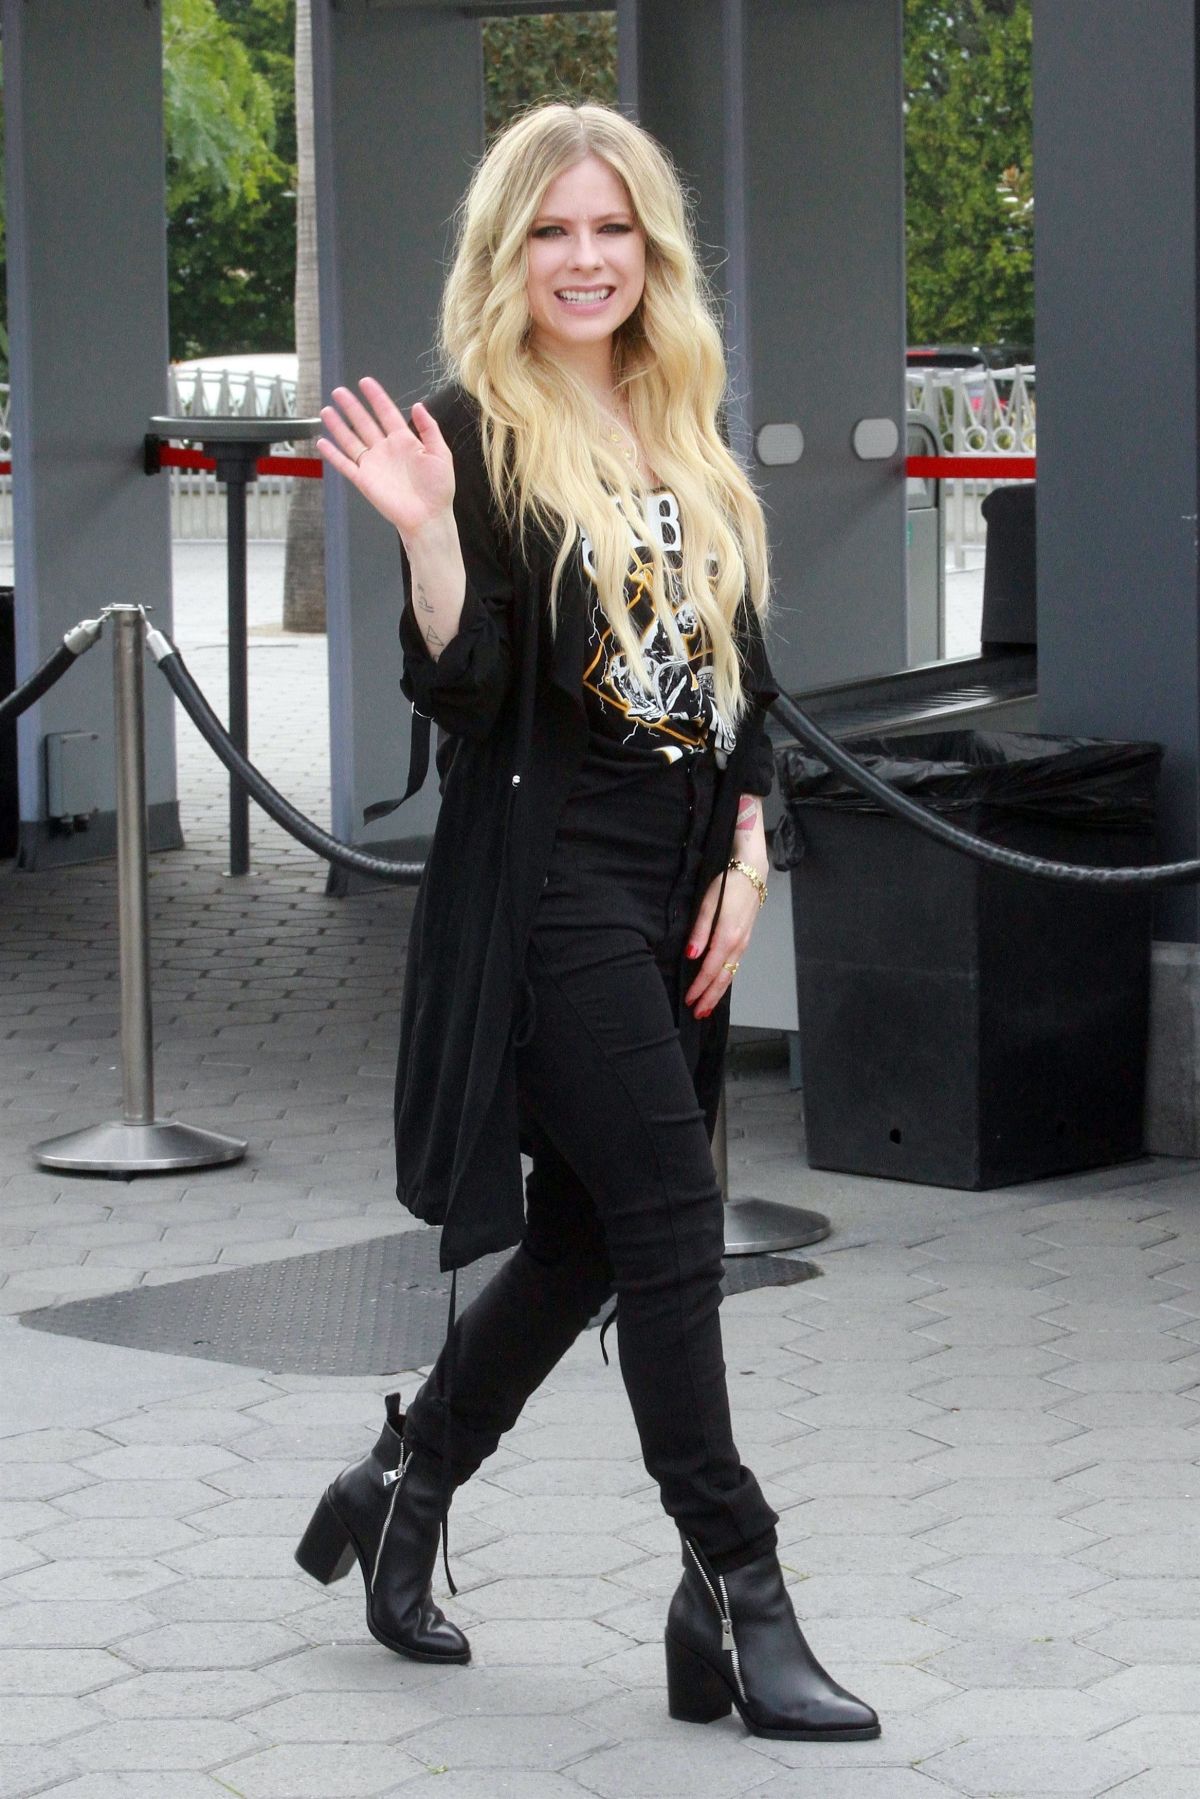 AVRIL LAVIGNE at Extra at Universal Studios in Hollywood 02/27/2019 – HawtCelebs1200 x 1799